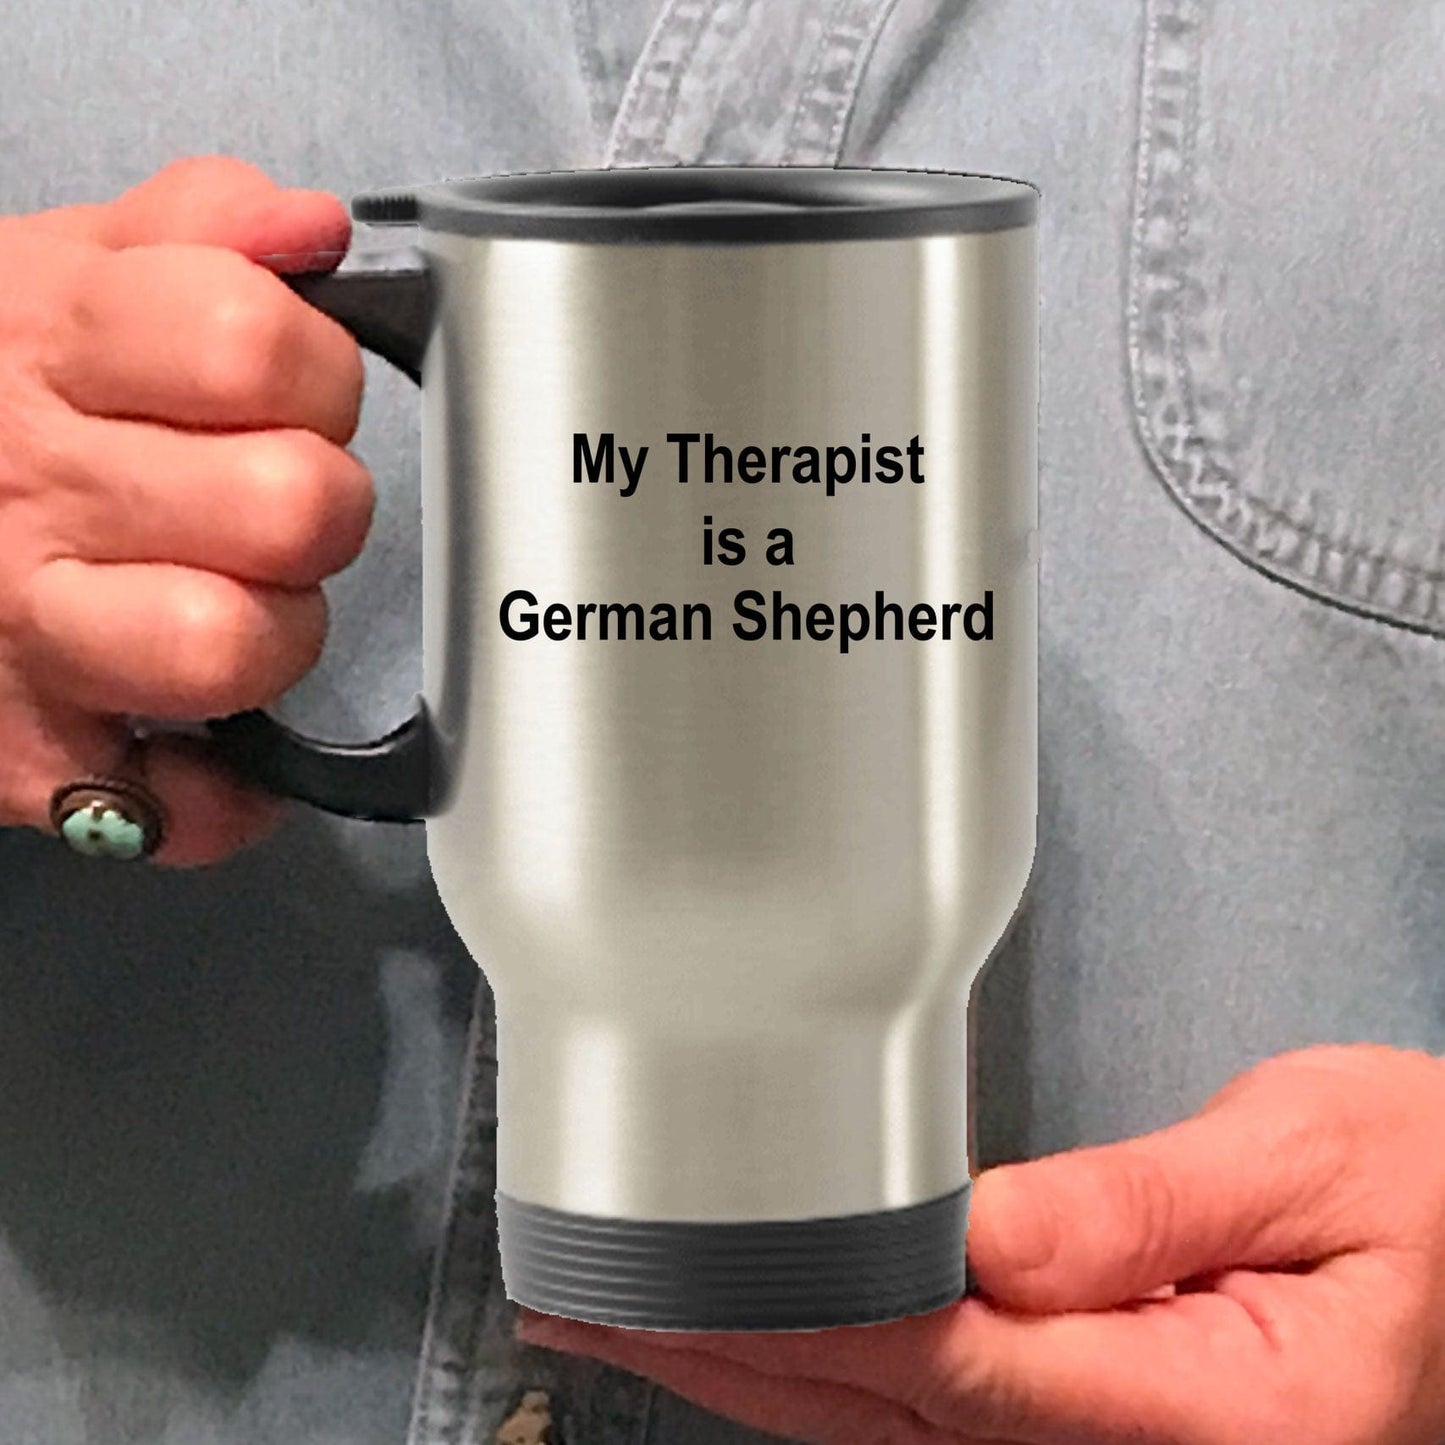 German Shepherd Dog Lover Gift Funny Therapist Stainless Steel Insulated Travel Coffee Mug